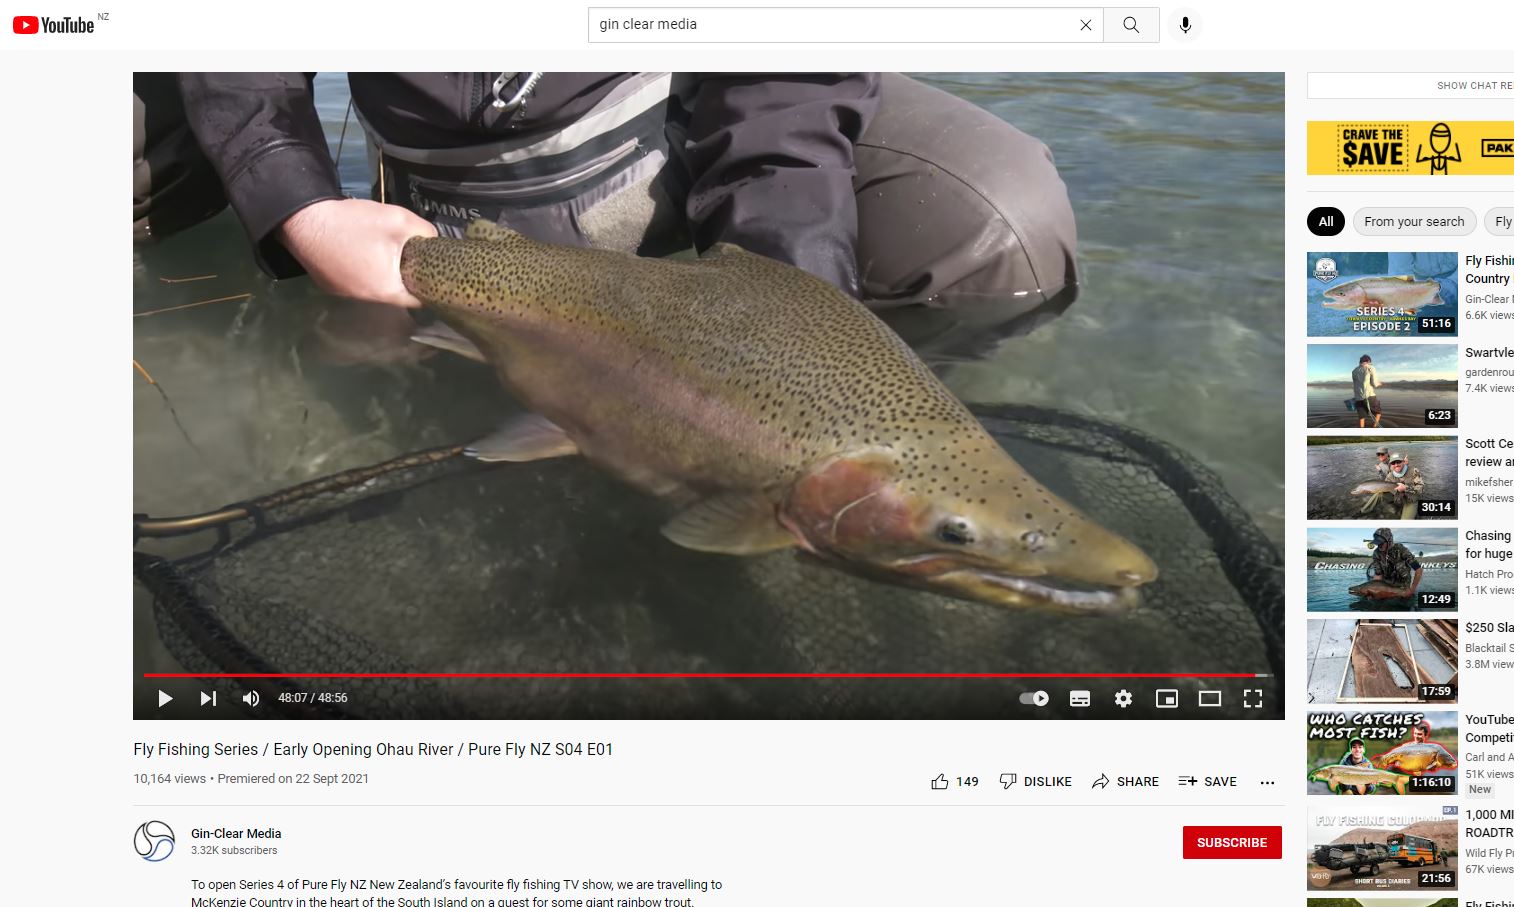 WFR2124.37 There are some fantastic videos featuring CSI region water on YouTube 